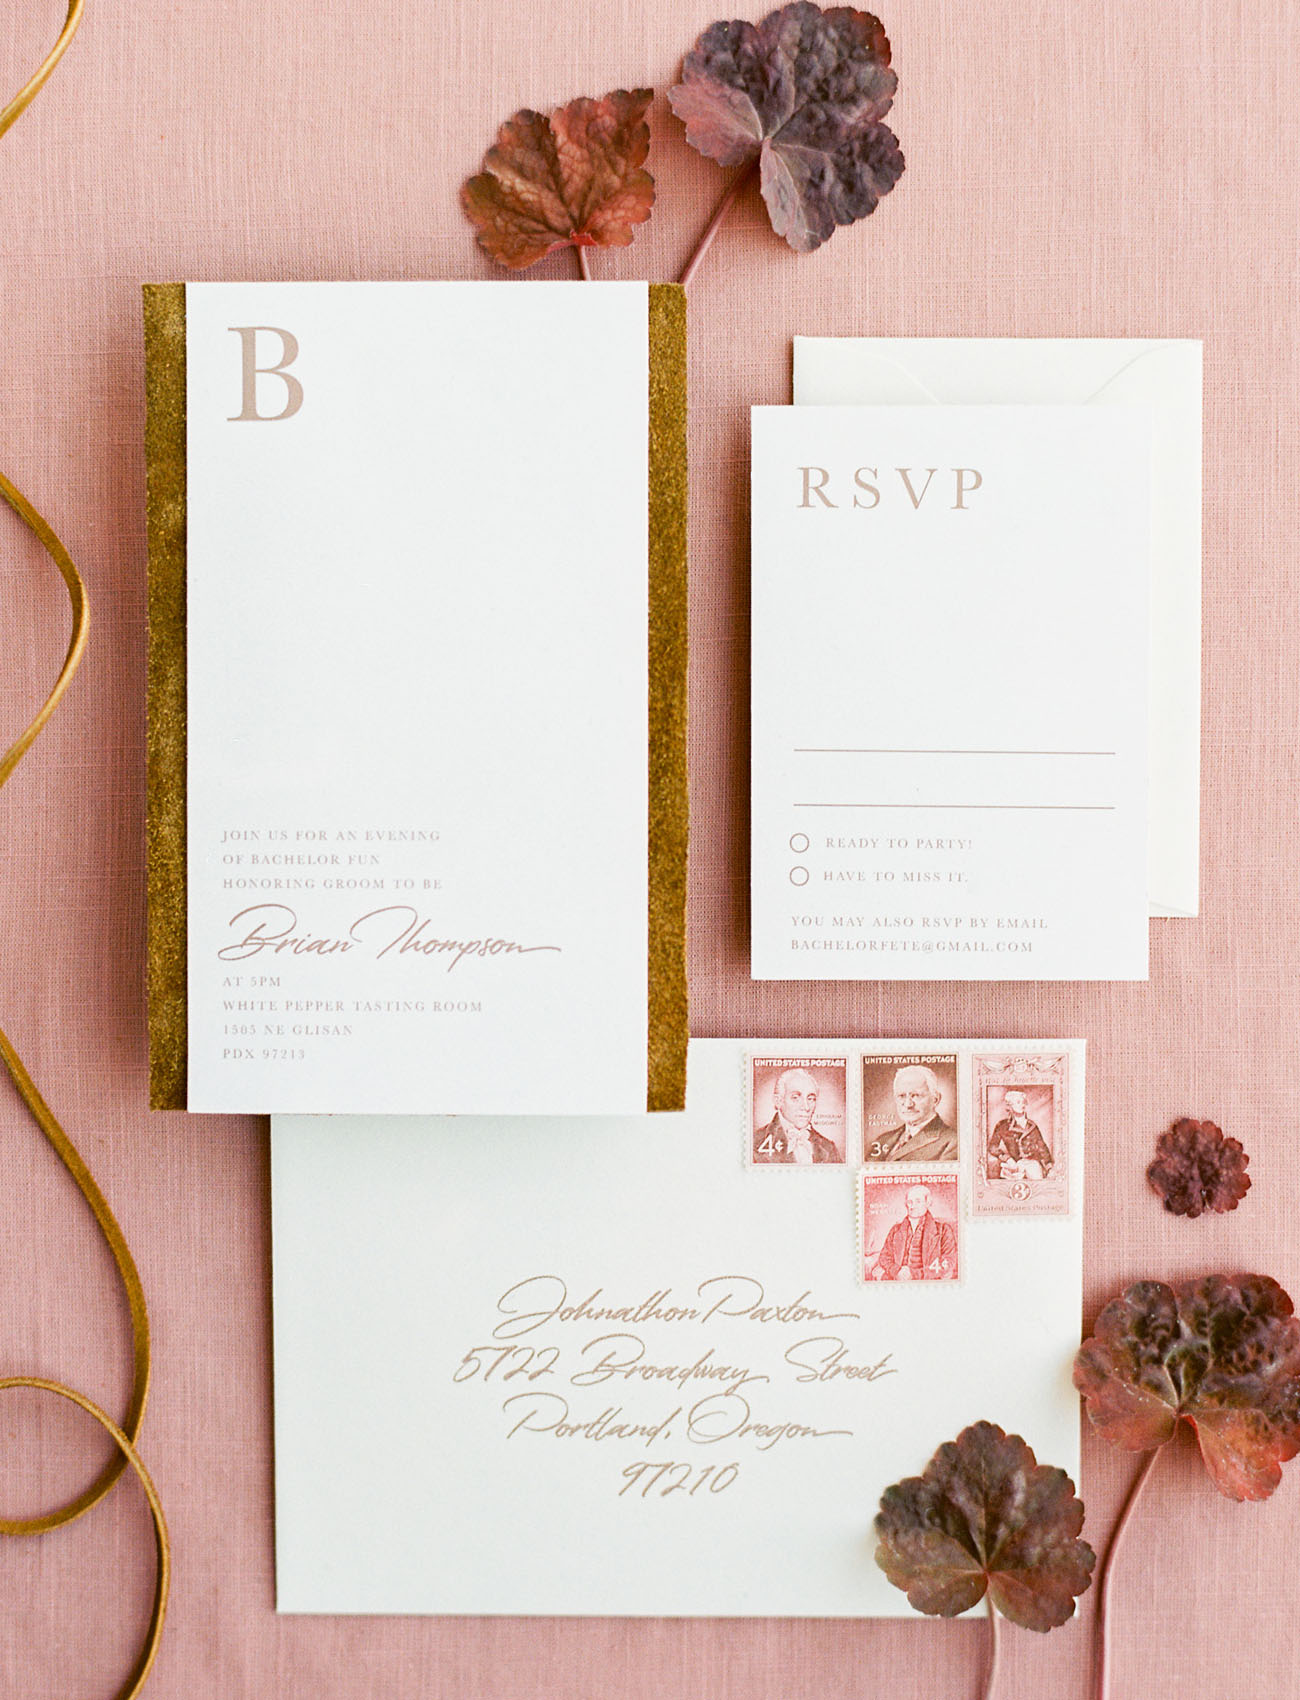 The wedding invitation suite was done with gold and rust touches plus calligraphy